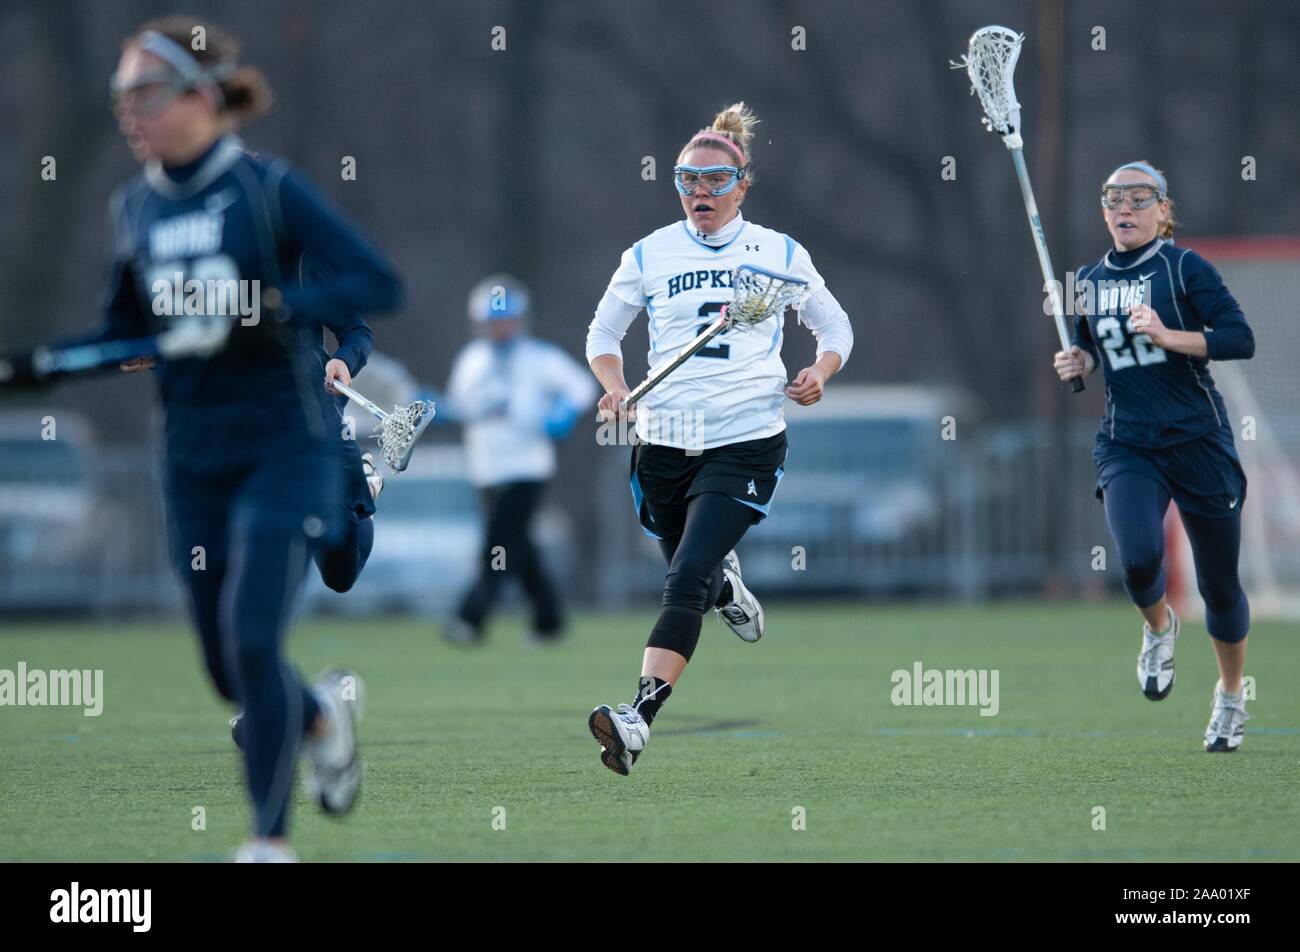 A Johns Hopkins University Women's Lacrosse player, runs, cradling the ball in her net, while being pursued by an opponent during a match with Georgetown University, February 25, 2009. From the Homewood Photography Collection. () Stock Photo